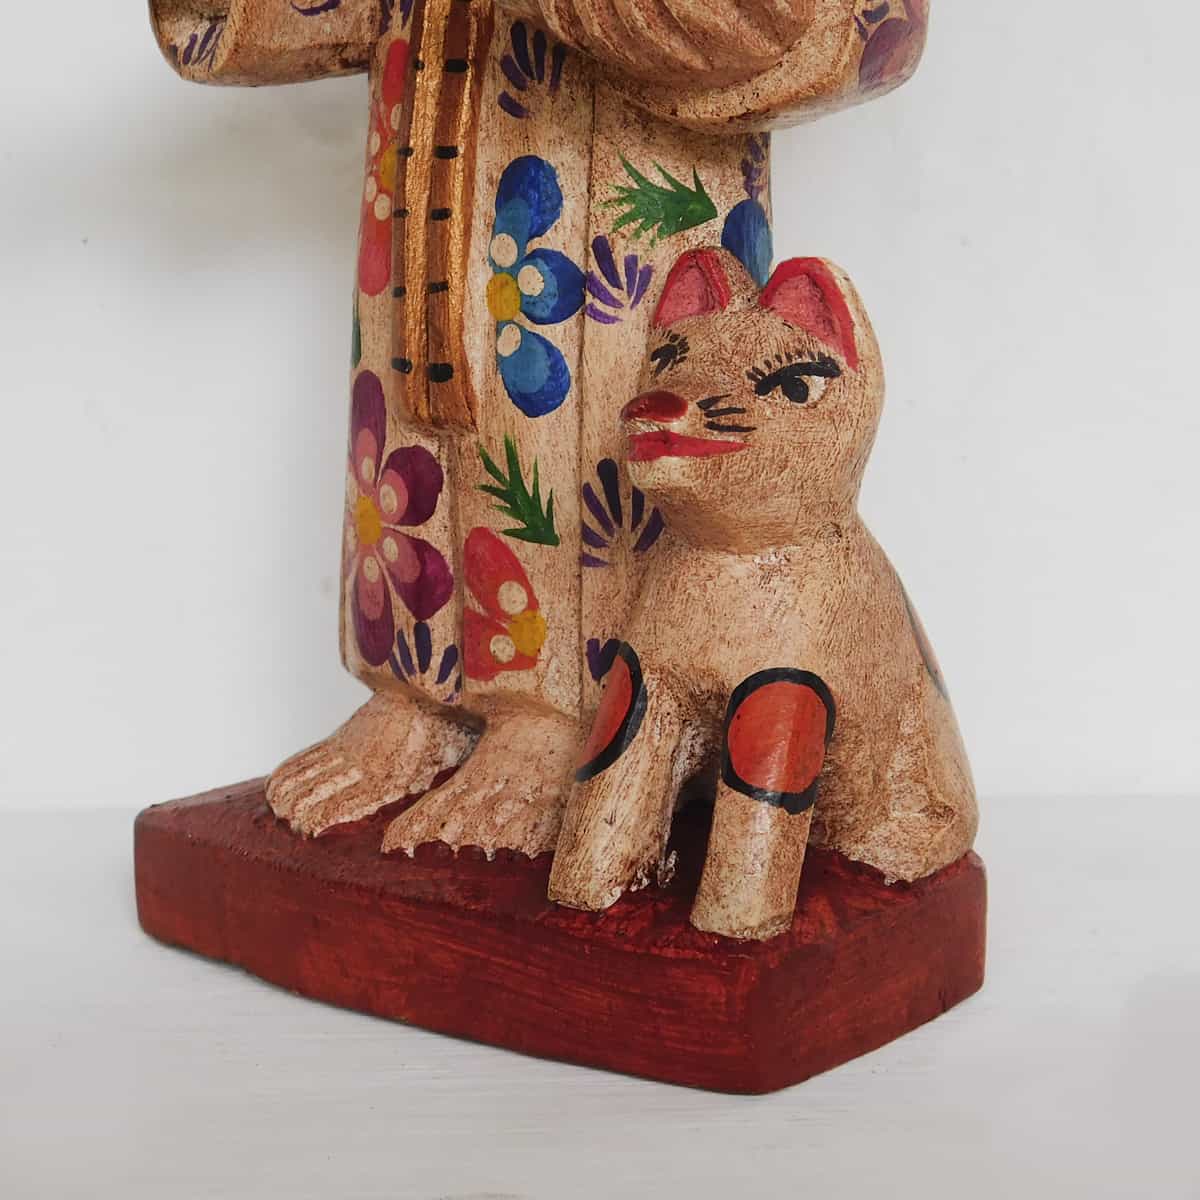 carved wooden figurine fo a cat next to saint francis figurine